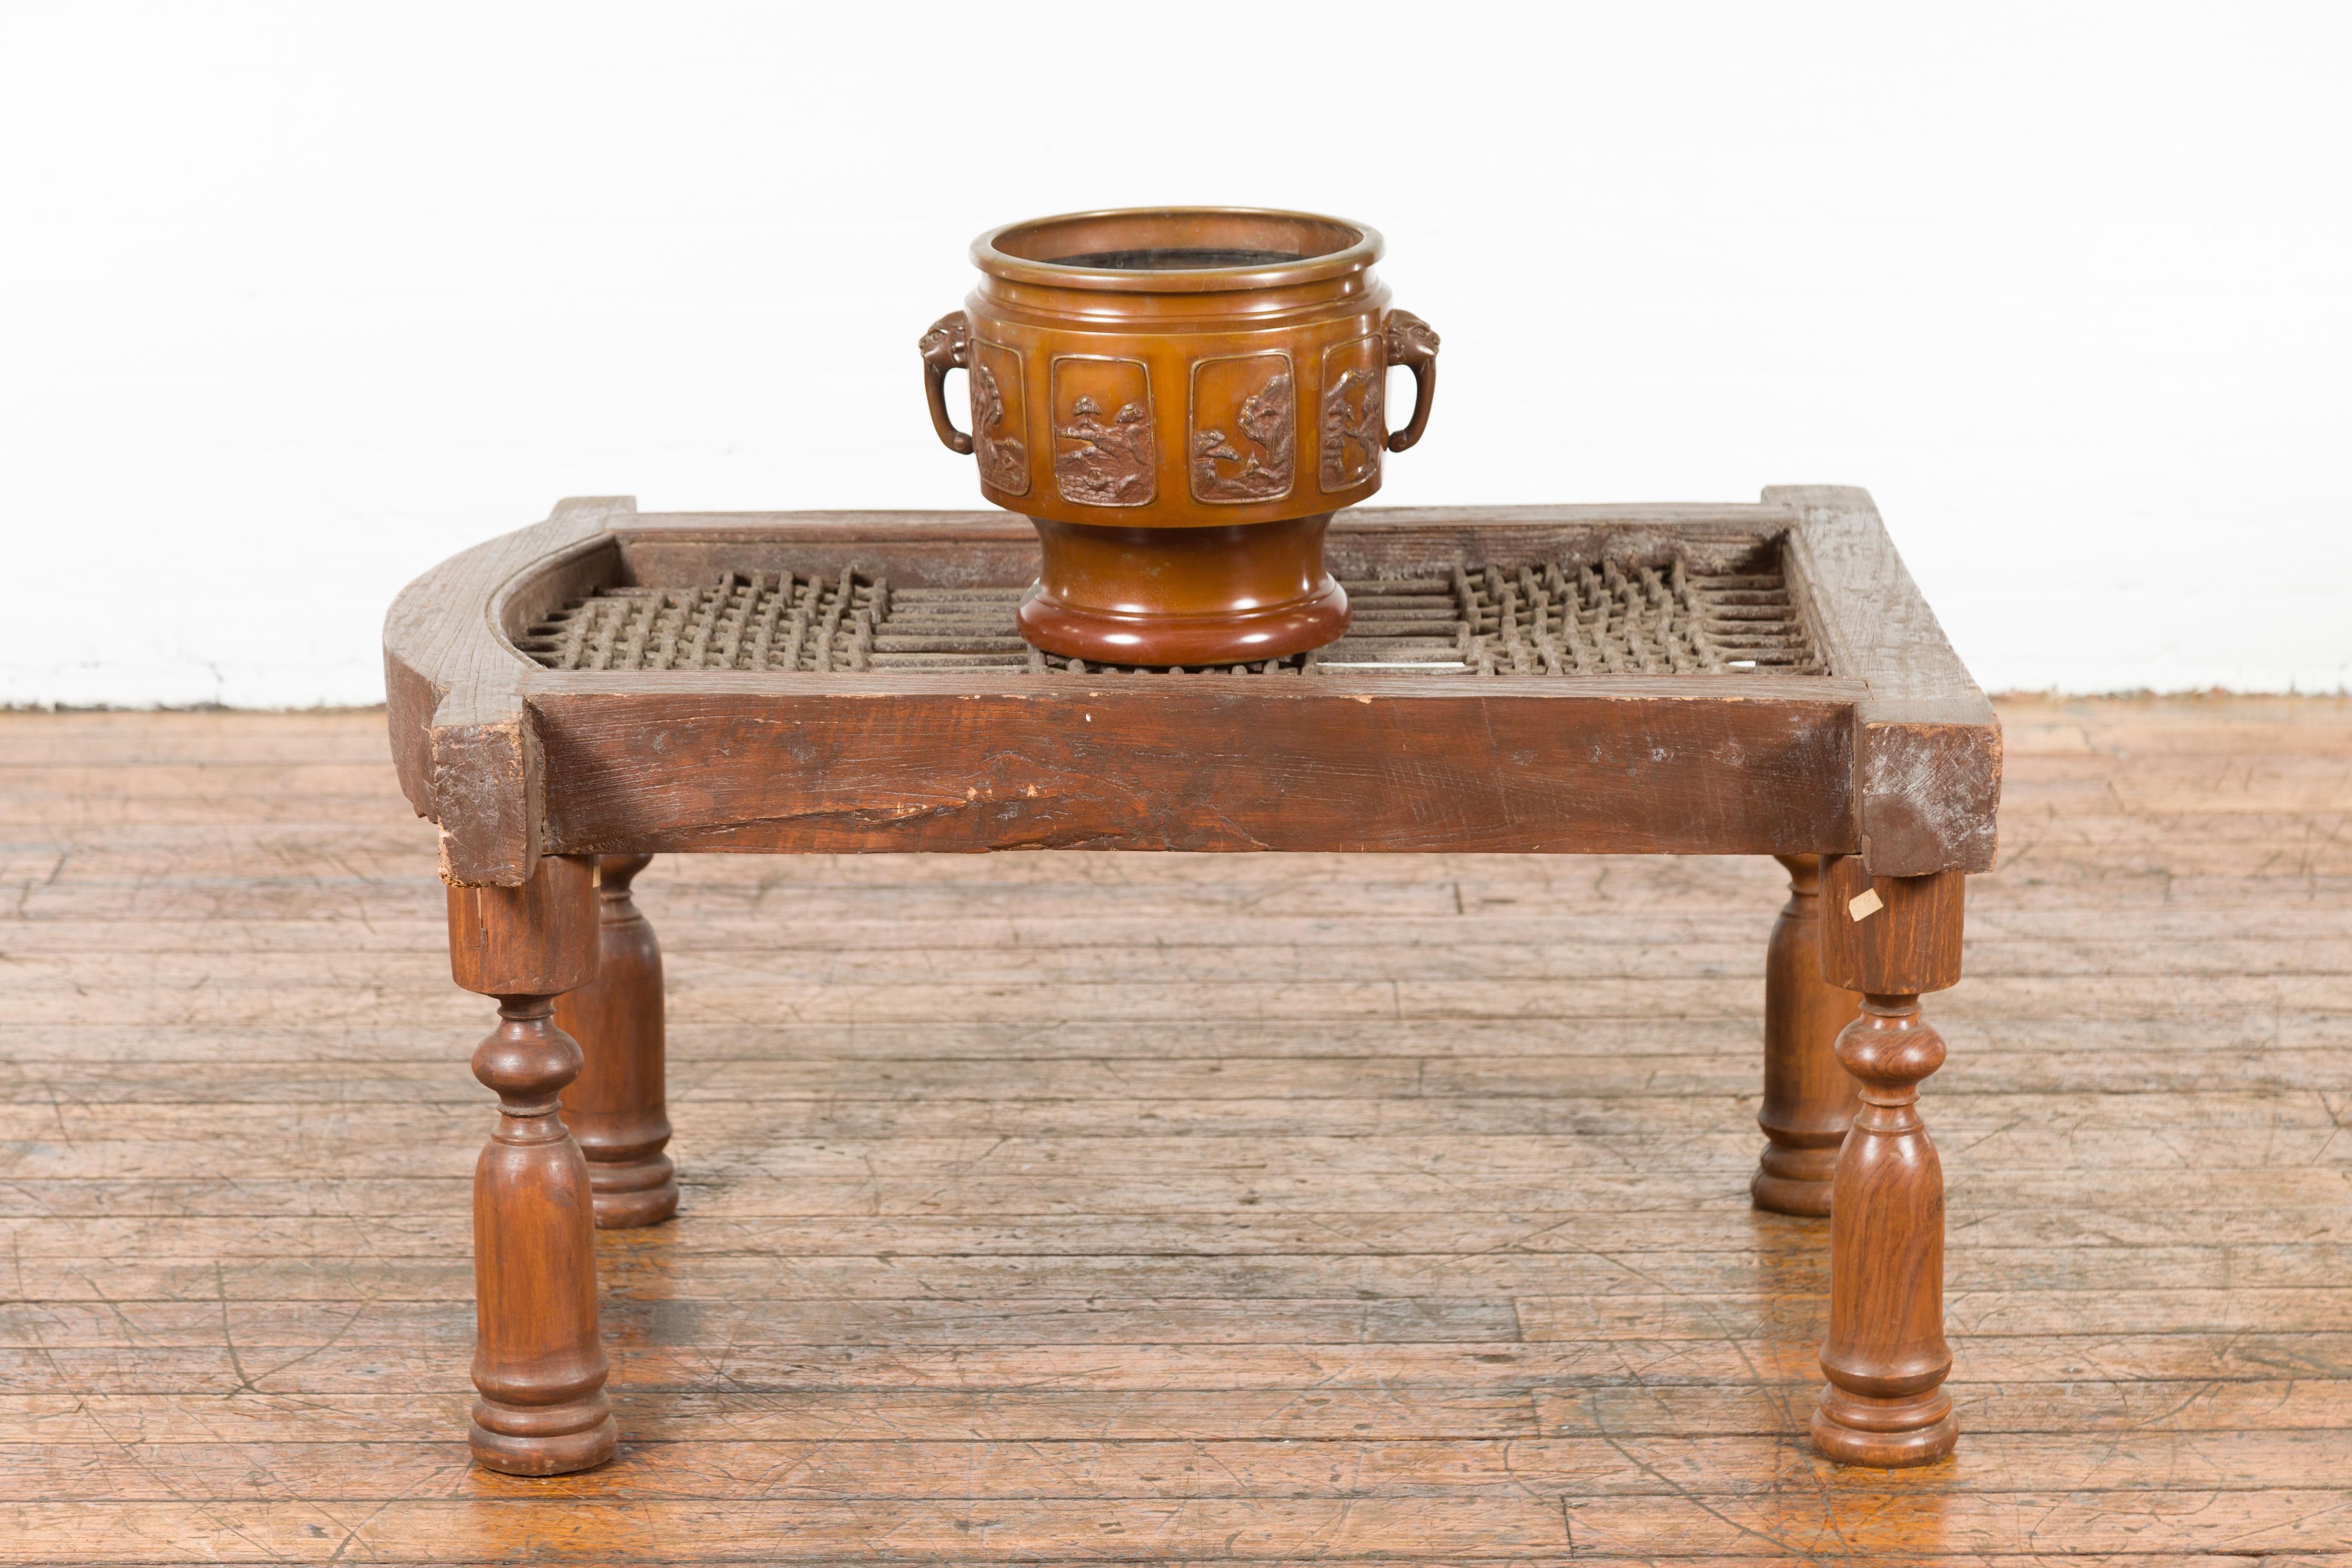 An antique rustic Indian window grate from the 19th century, made into a coffee table with baluster legs and weathered appearance. We have more assorted sizes available, please contact us with any questions. Introduce a piece of Indian architectural